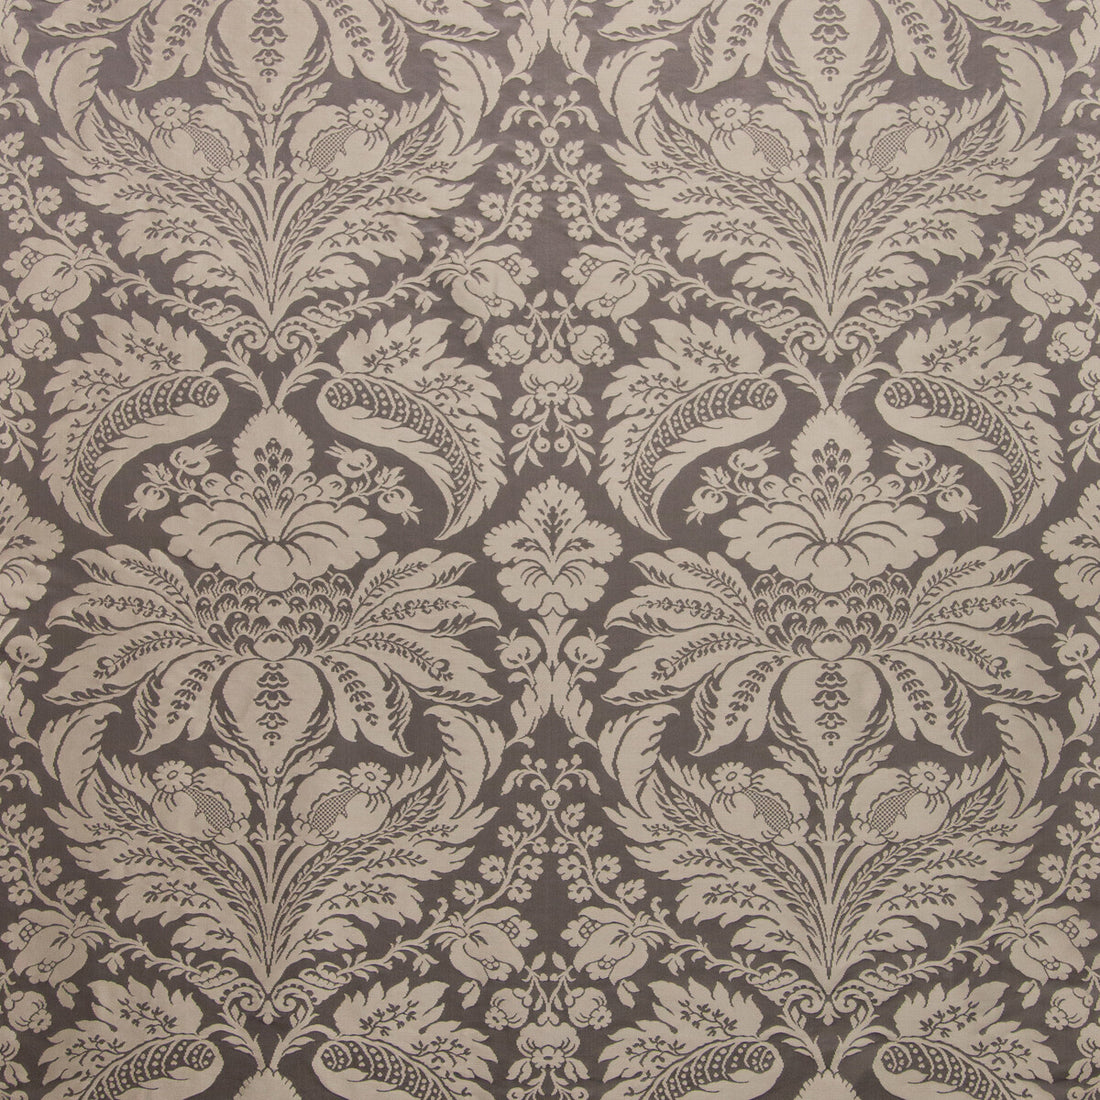 Damask Pierre fabric in charcoal color - pattern 8013188.21.0 - by Brunschwig &amp; Fils in the B&amp;F Showroom Exclusive 2019 collection